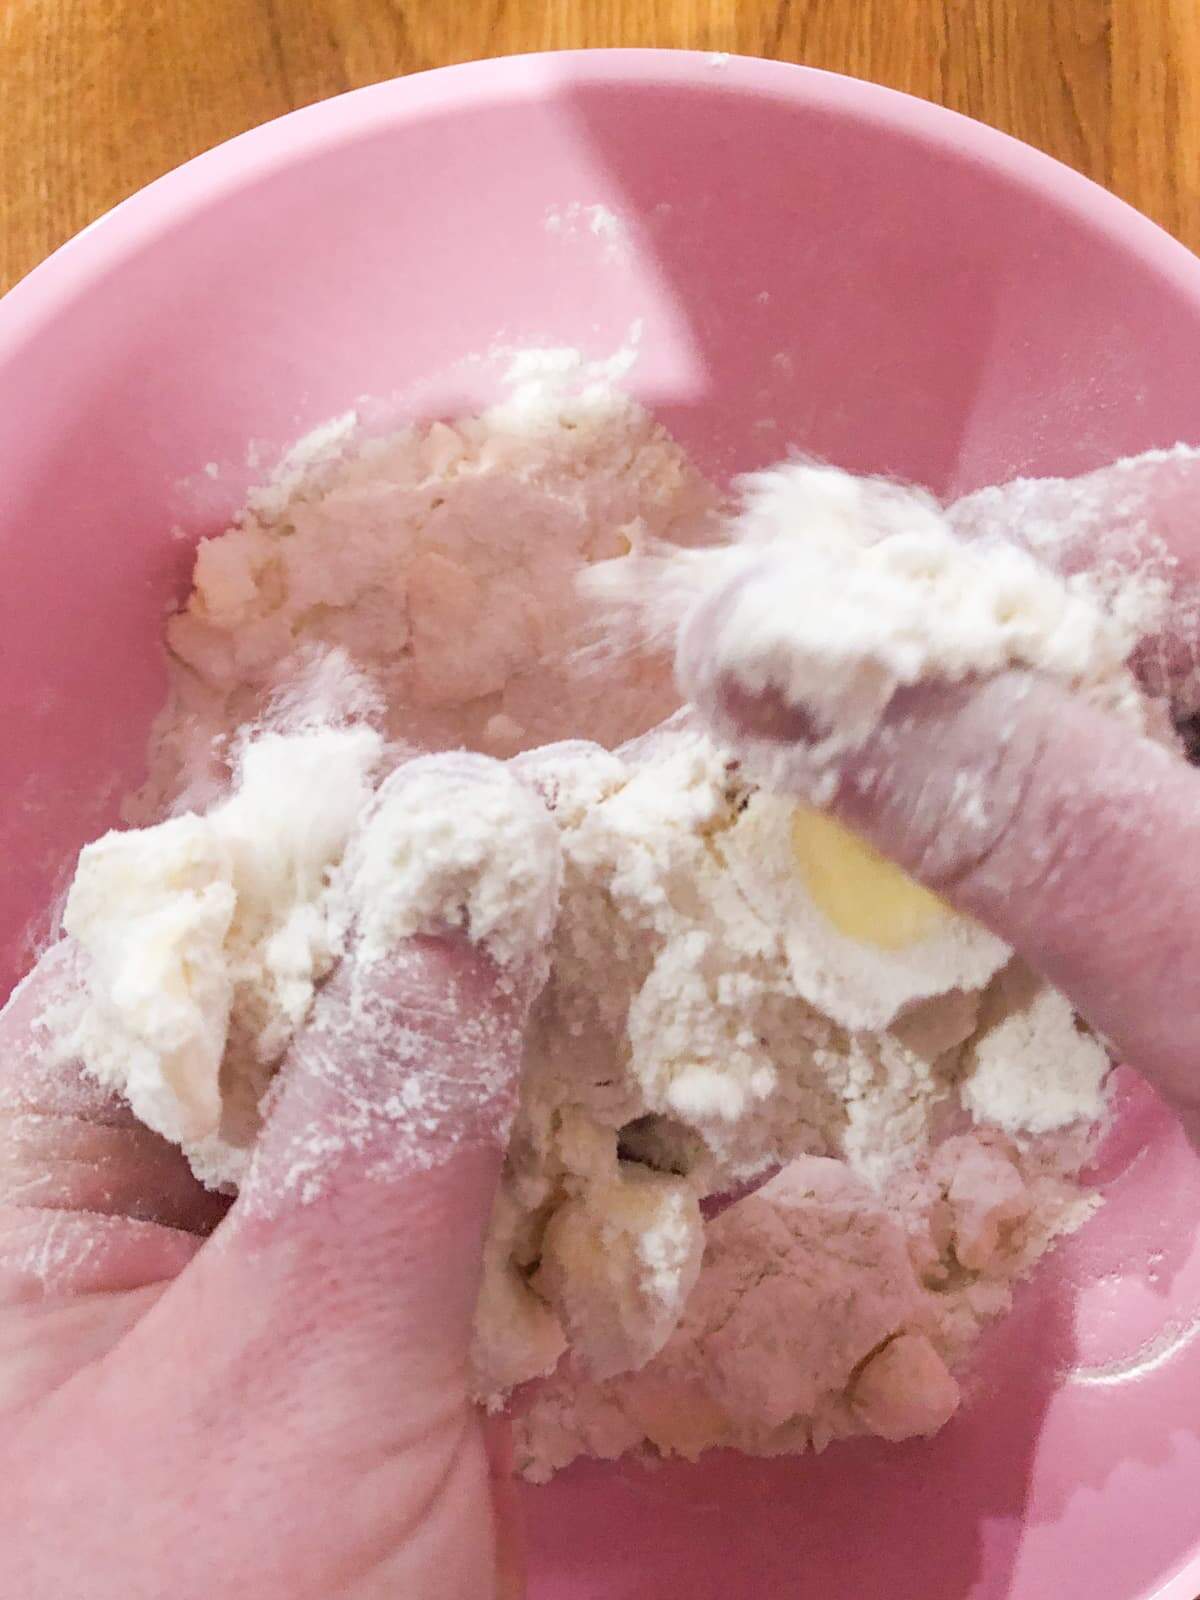 Step by step of making rhubarb crumble rubbing together flour, sugar and butter between your fingers.